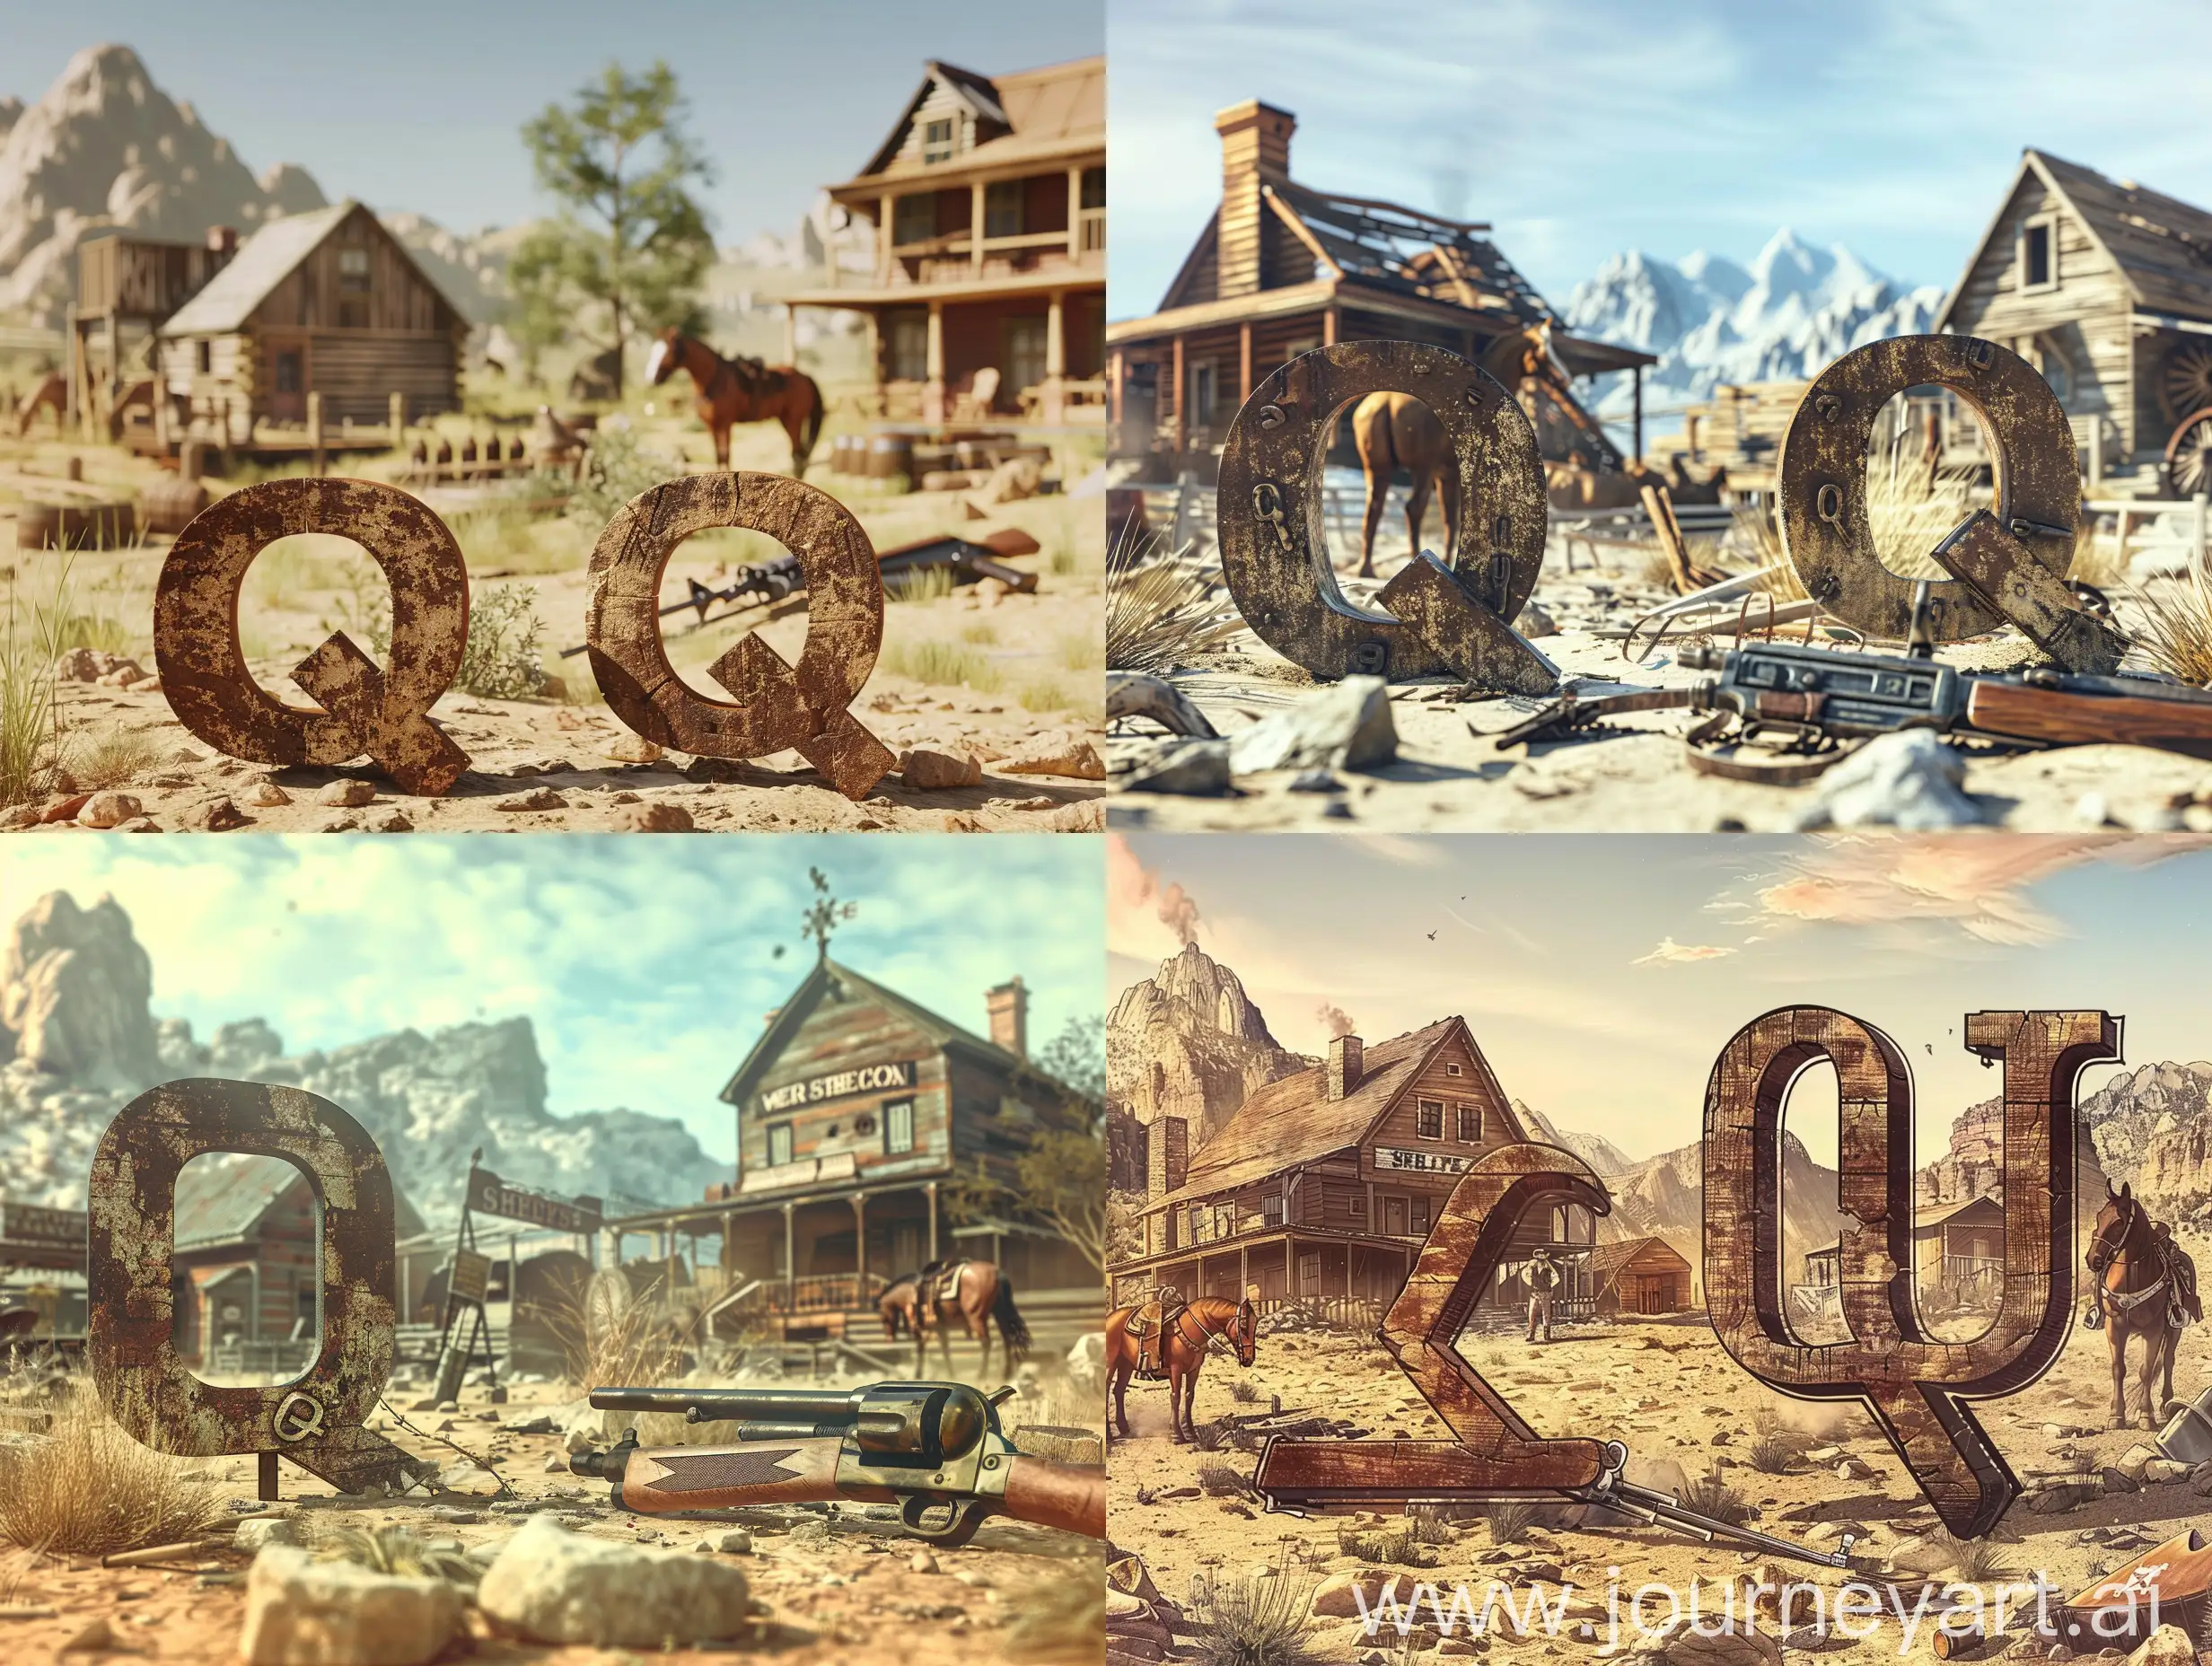 In the foreground are two letters "EQ", wild West style, in the background a cowboy settlement and a sheriff's house, a kar89k rifle, a horse, all in high quality.